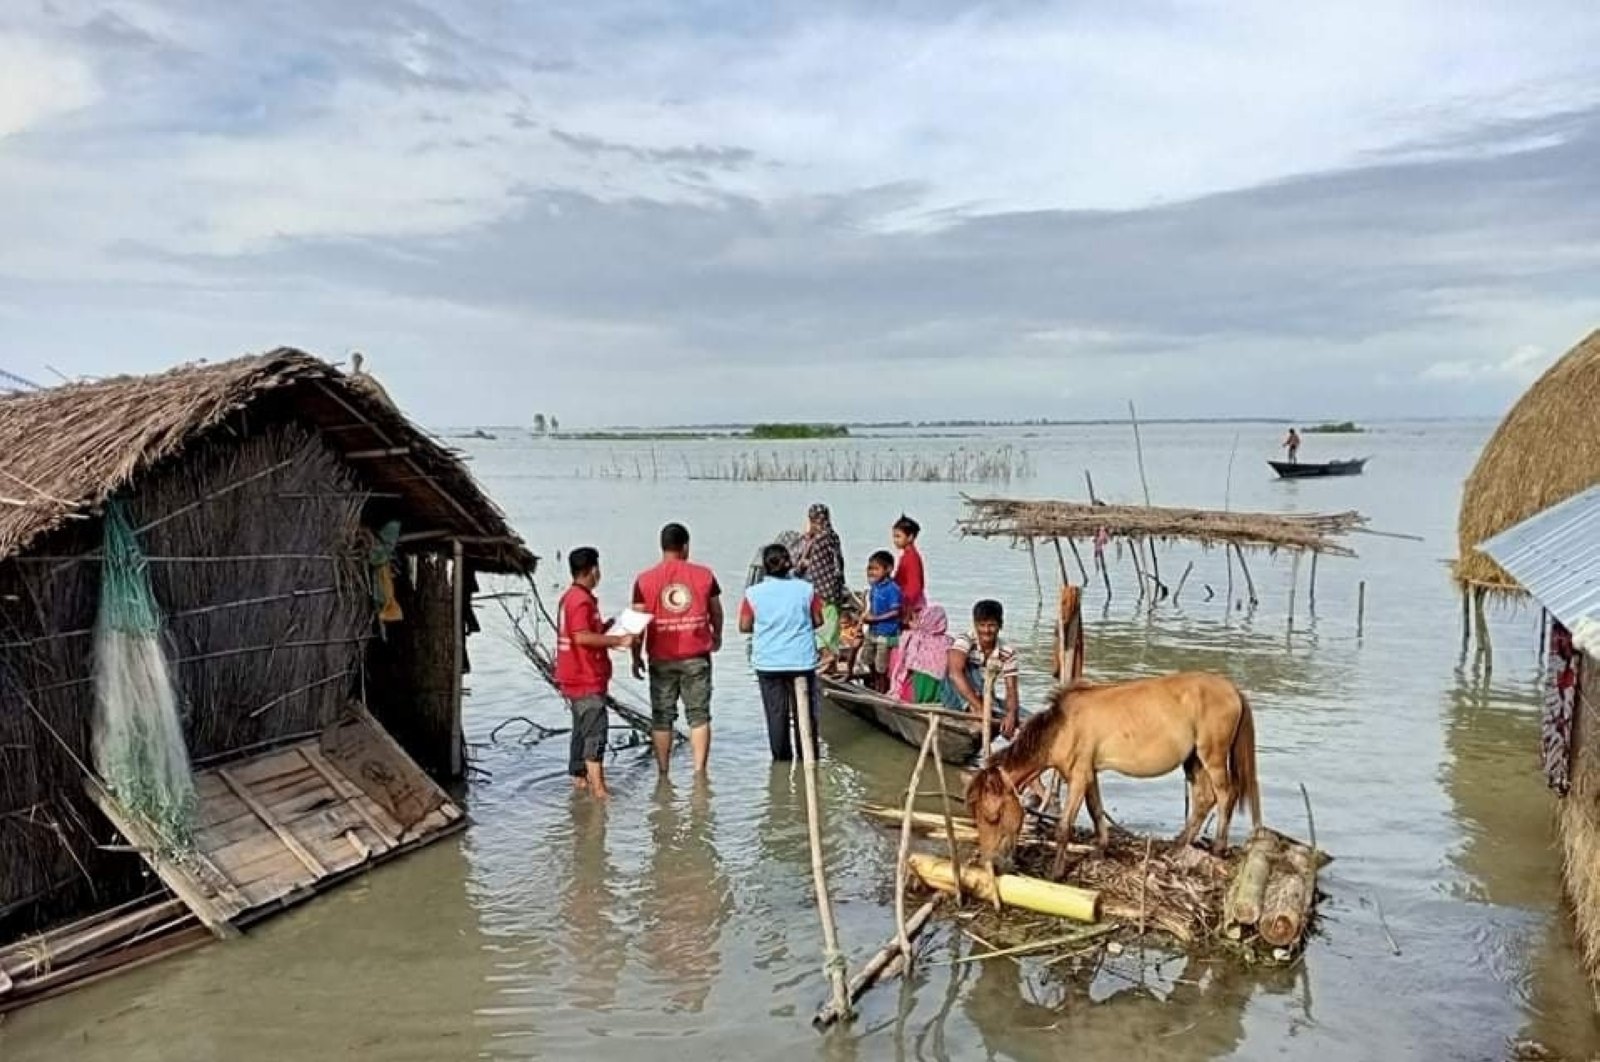 This photograph, provided by the International Federation of Red Cross and Red Crescent Societies (IFRC), shows IFRC volunteers reaching flood-affected communities with drinking water and other support in Kurigram, Bangladesh, July 16, 2020. (AP Photo)